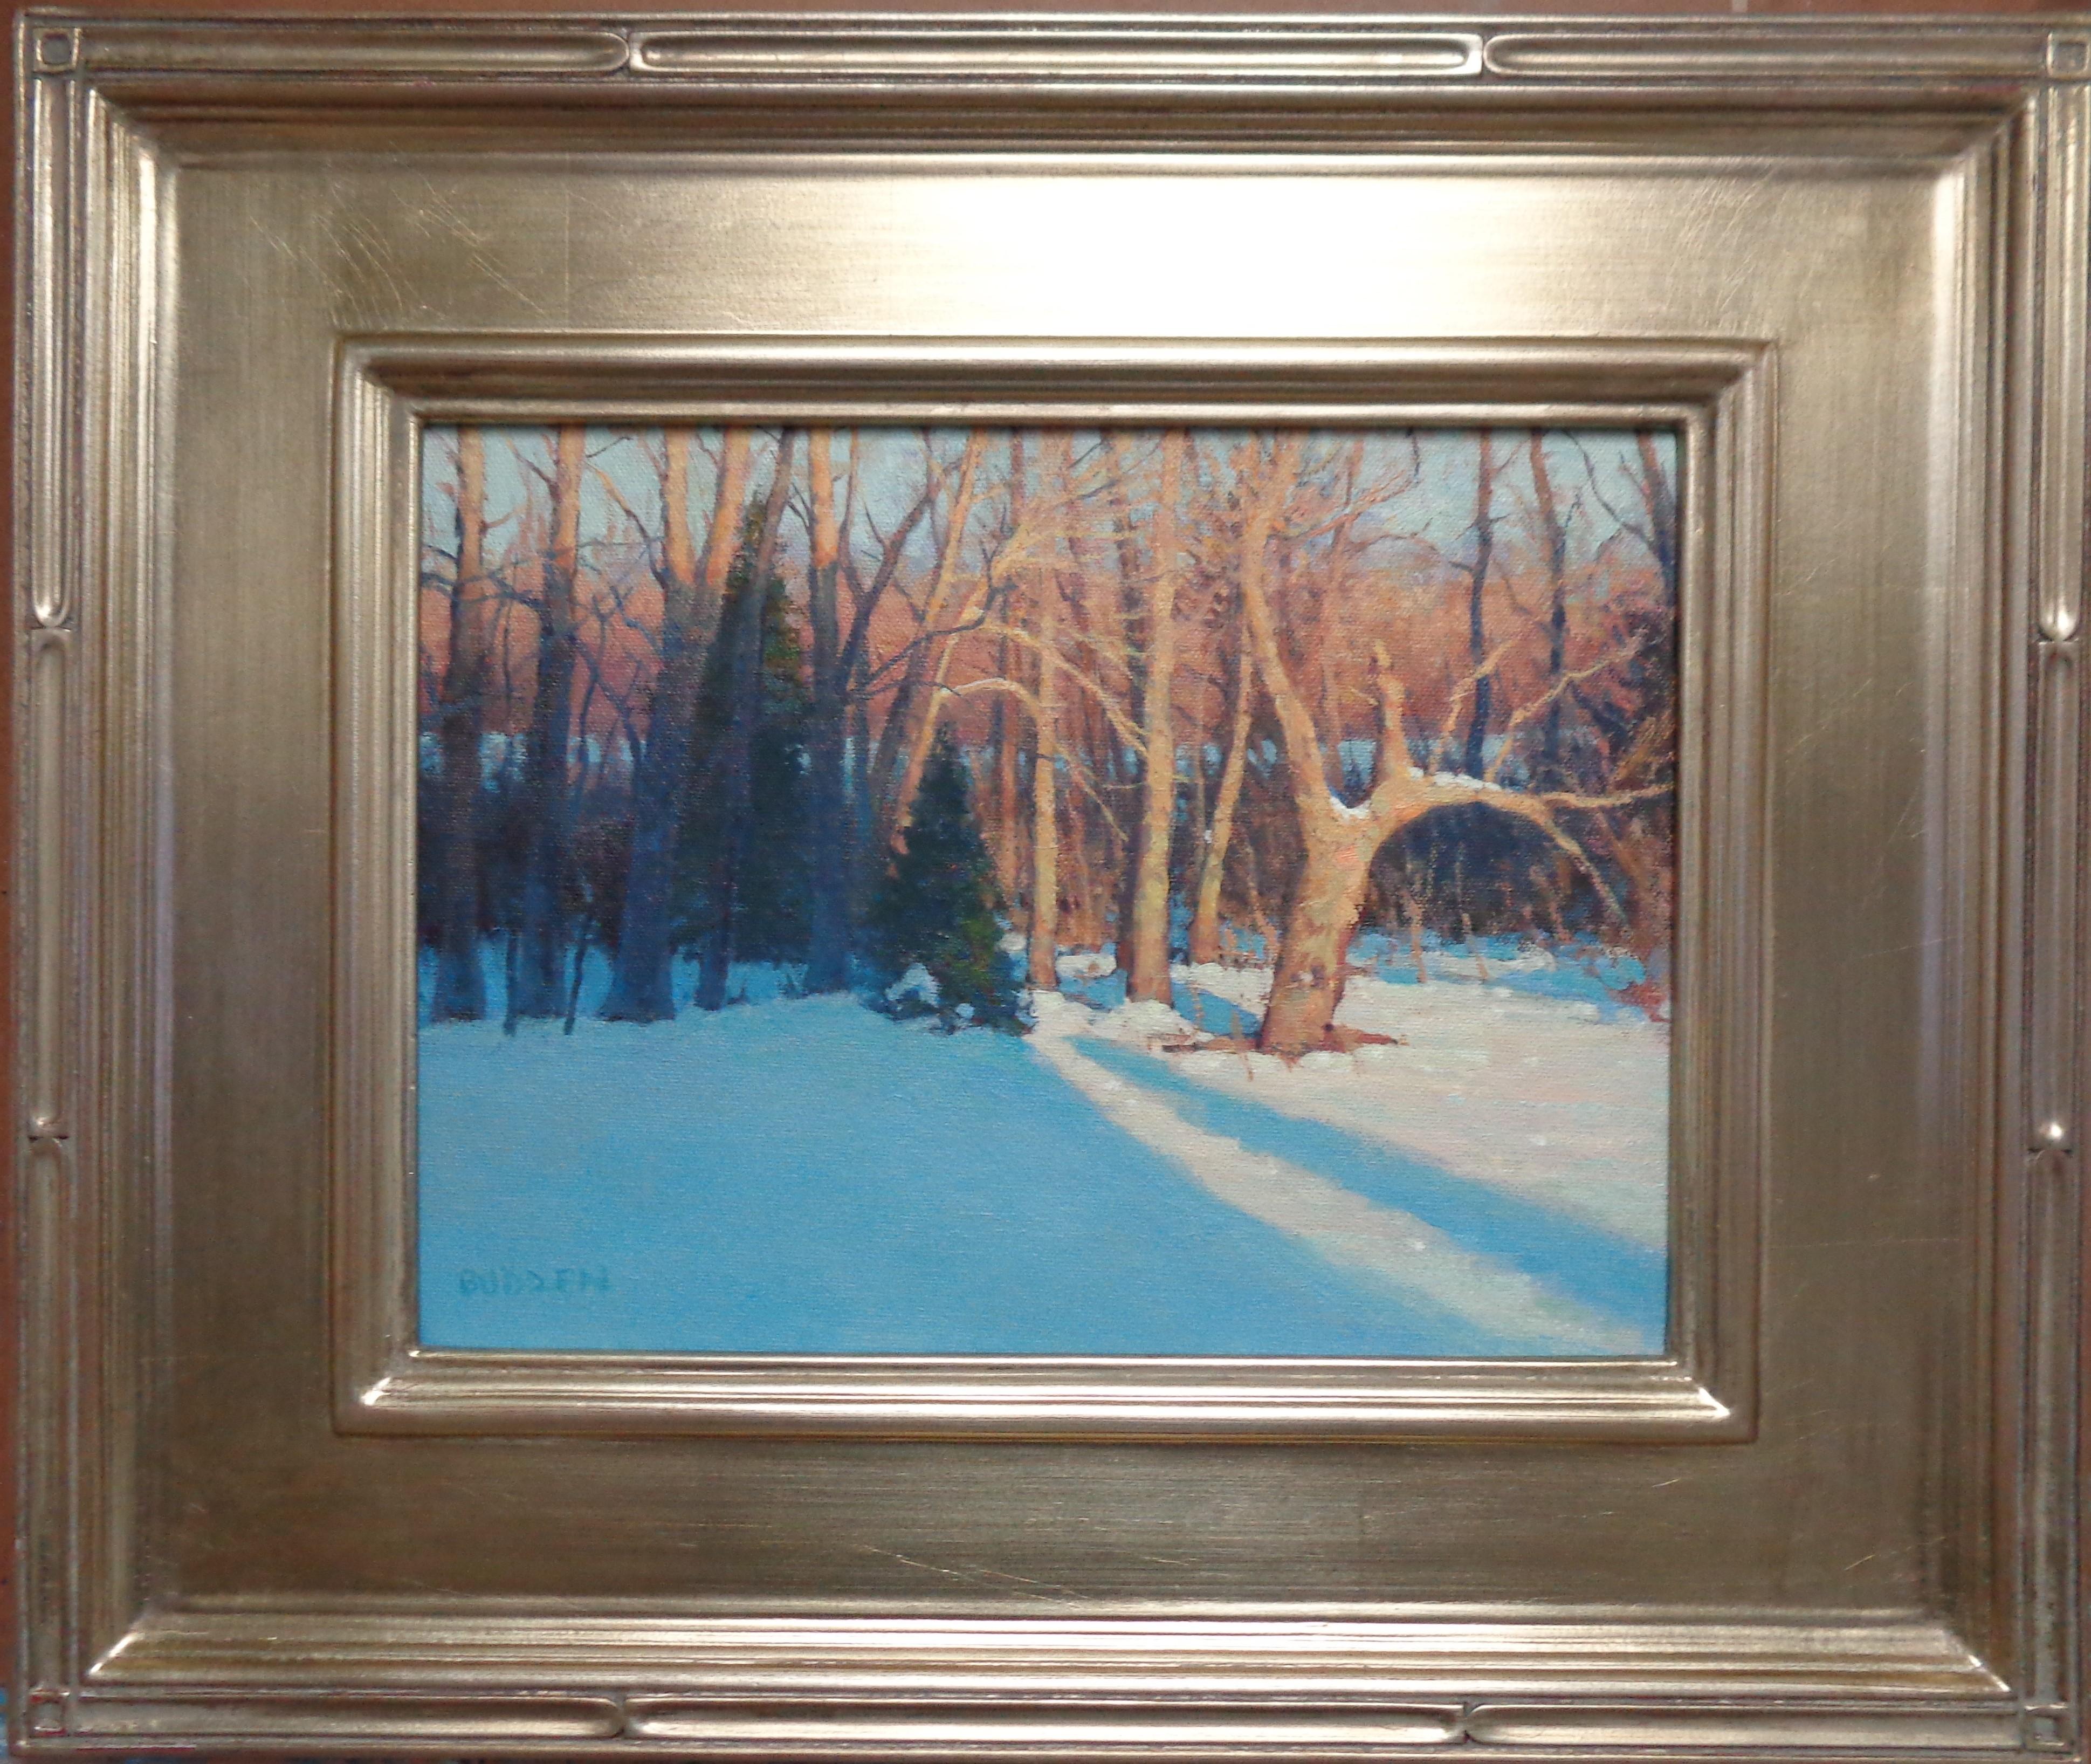 Sunlight & Shadow Winter Trees
oil/canvas 
9 x 12 image

SELLERS STATEMENT
I have been in the art business as an artist and dealer since the early 80's. Almost 40 years now. I primarily concentrate on my own art. My art is derived in a variety of